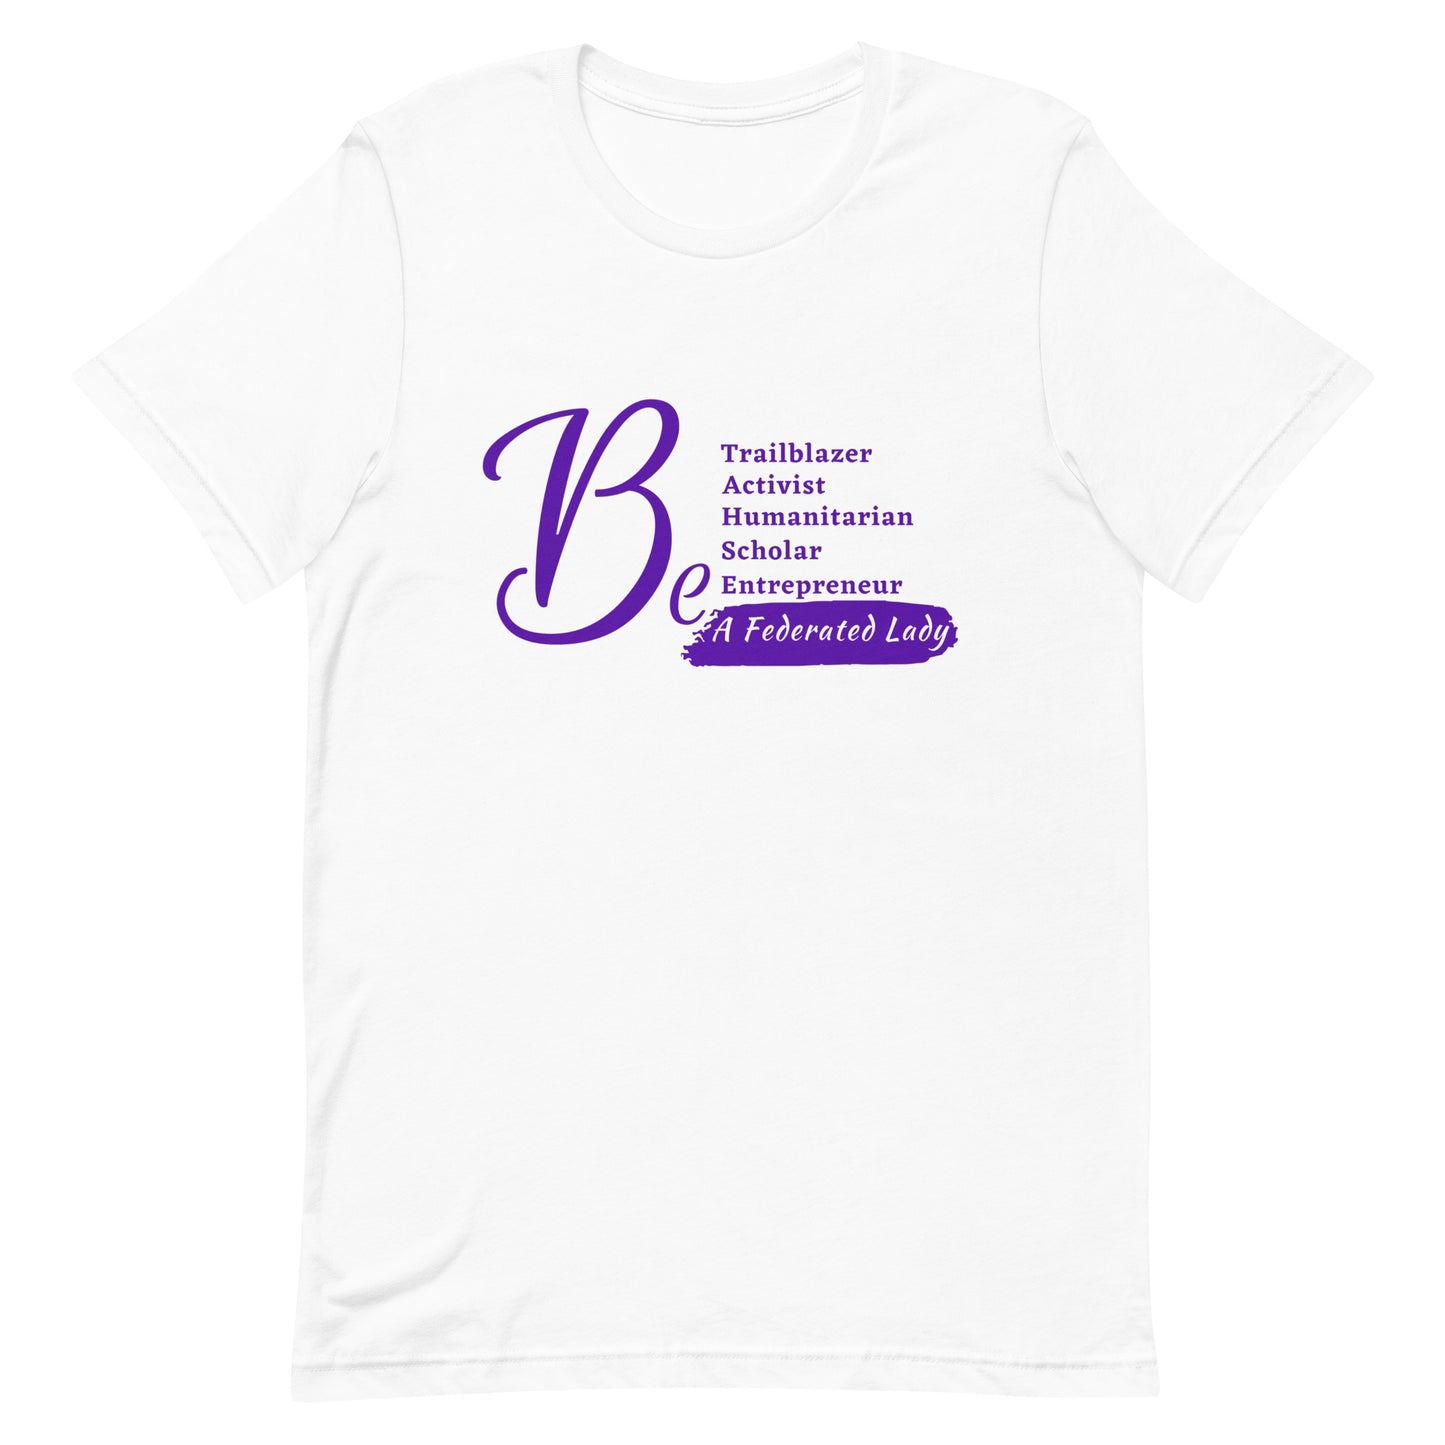 Be a Federated Lady T-shirt